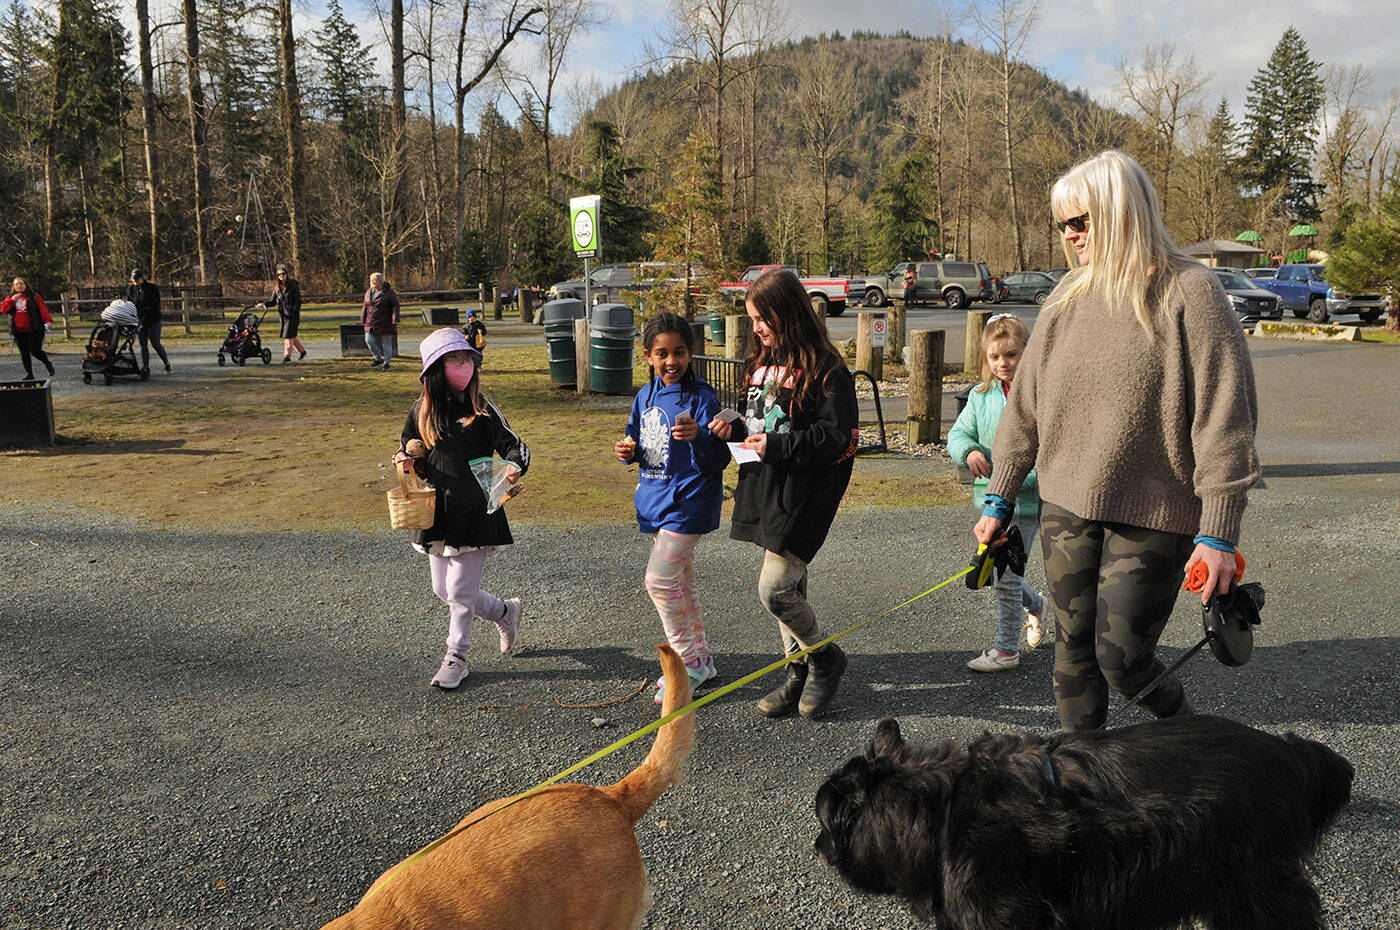 Kids from Watson Elementary prepare to buy a stranger a coffee at Vedder Park during Watson Elementarys Kindness Project on Wednesday, March 15, 2023. (Jenna Hauck/ Chilliwack Progress)